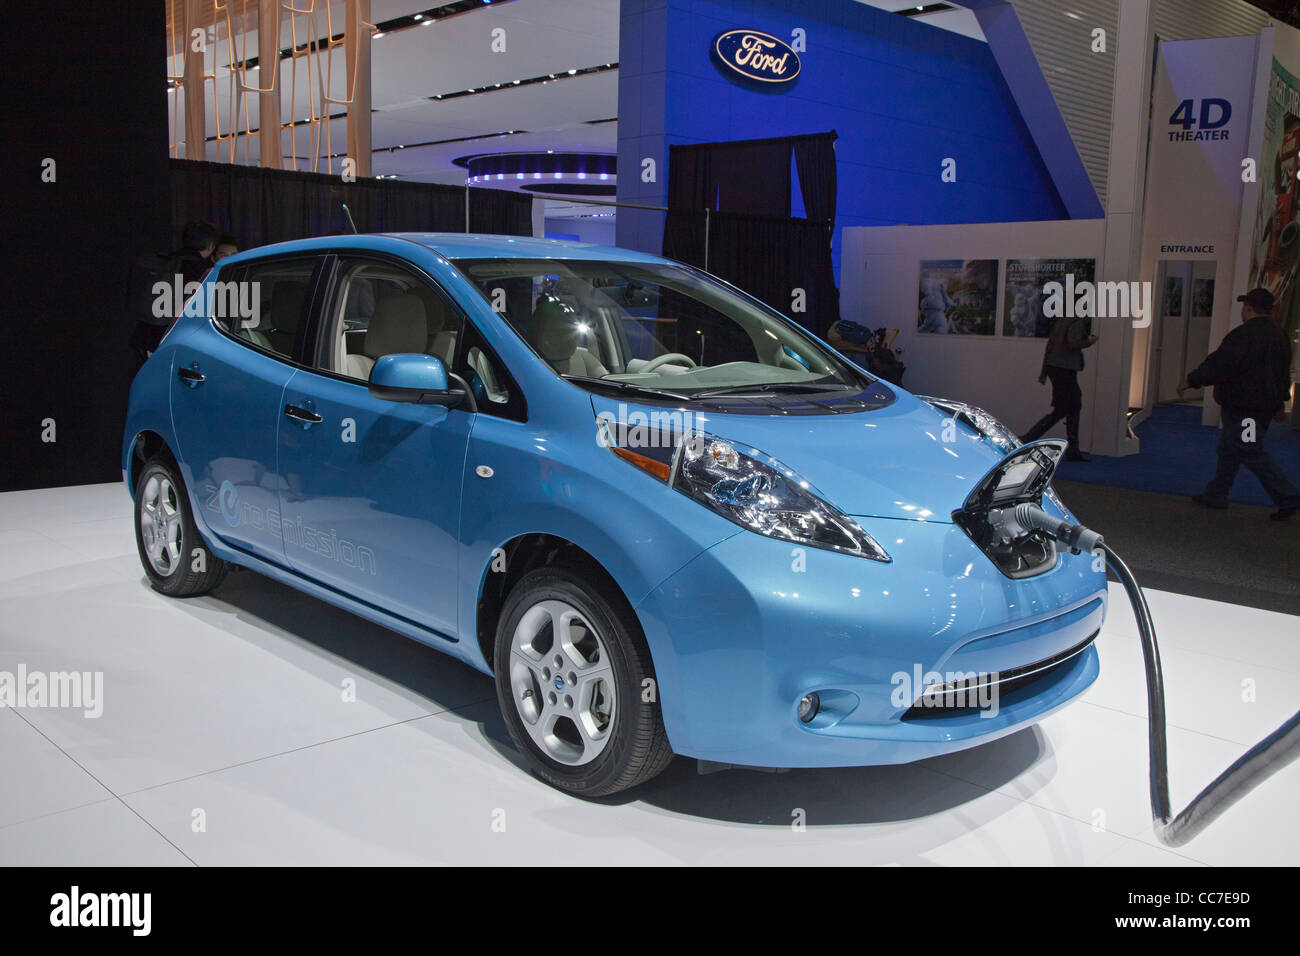 Detroit, Michigan - The Nissan Leaf electric vehicle on display at the North American International Auto Show. Stock Photo